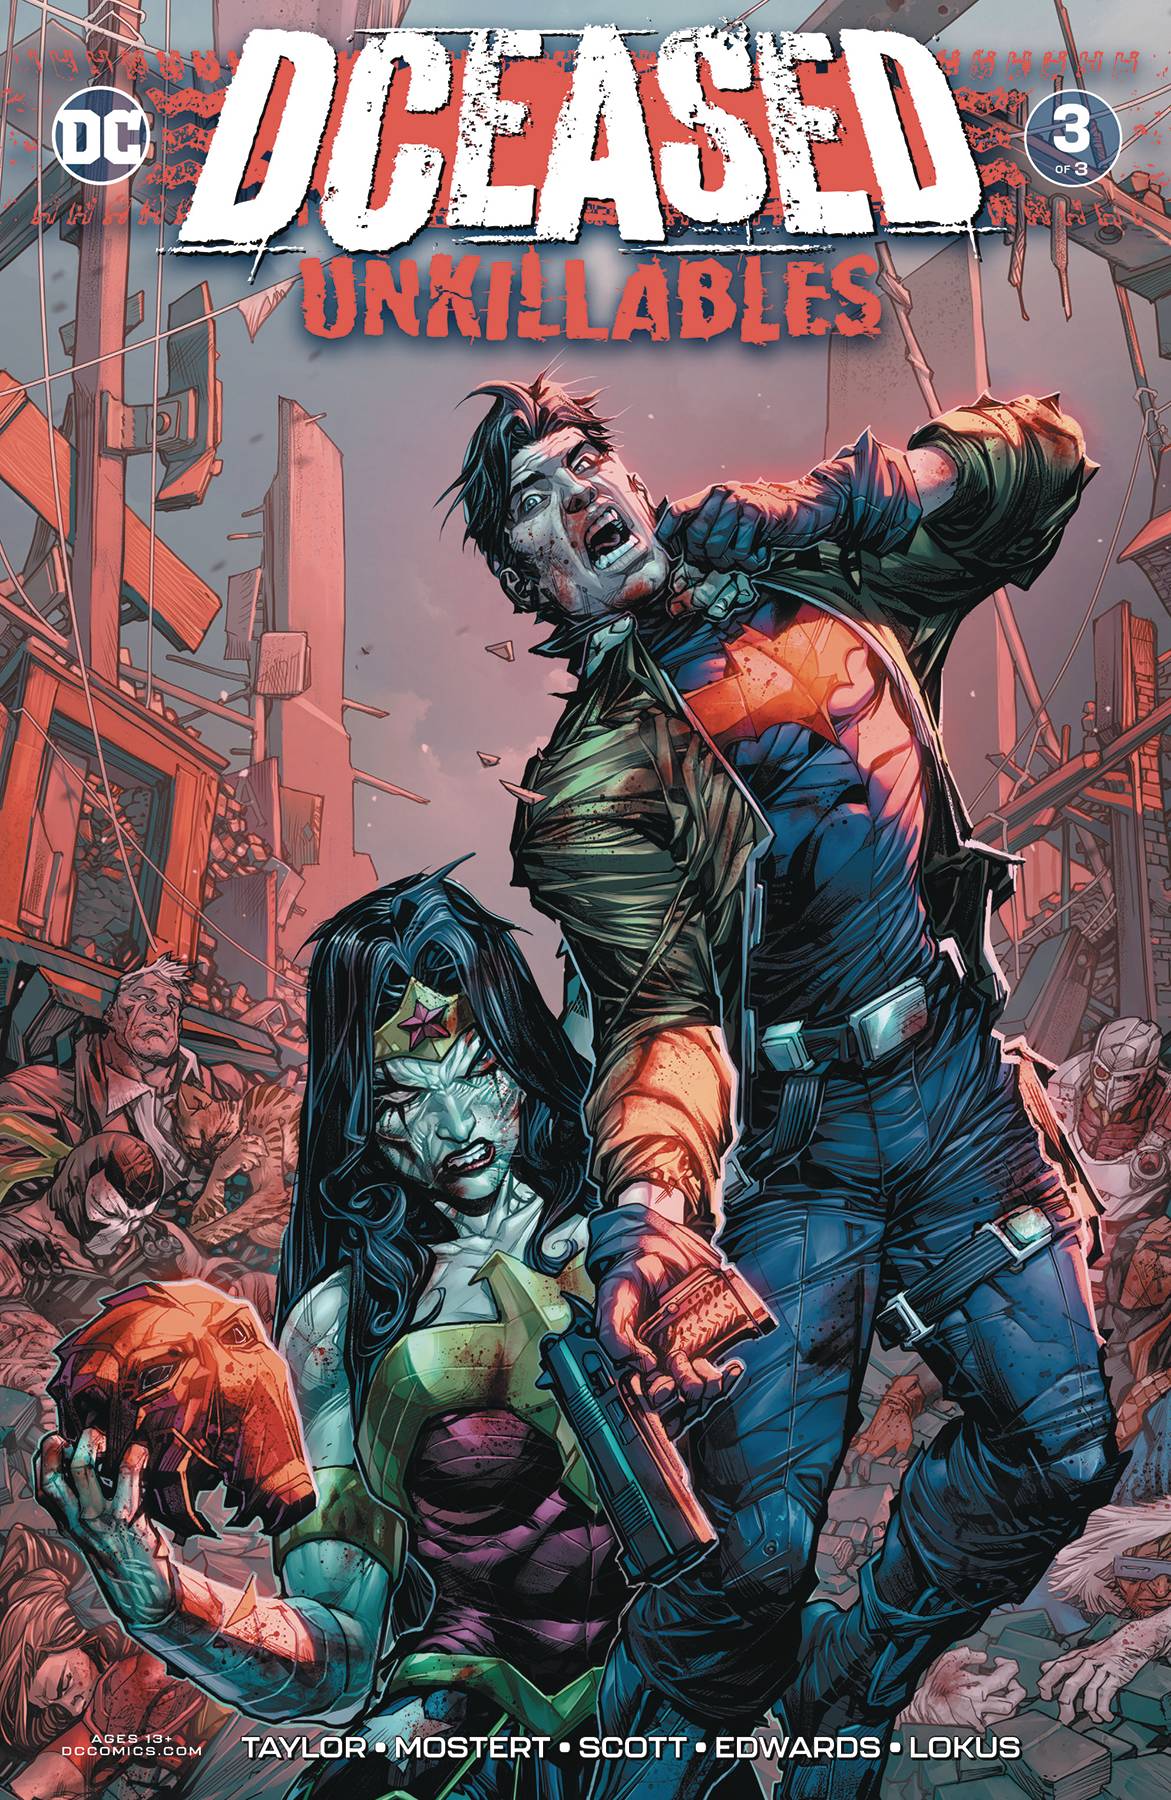 Dceased Unkillables #3